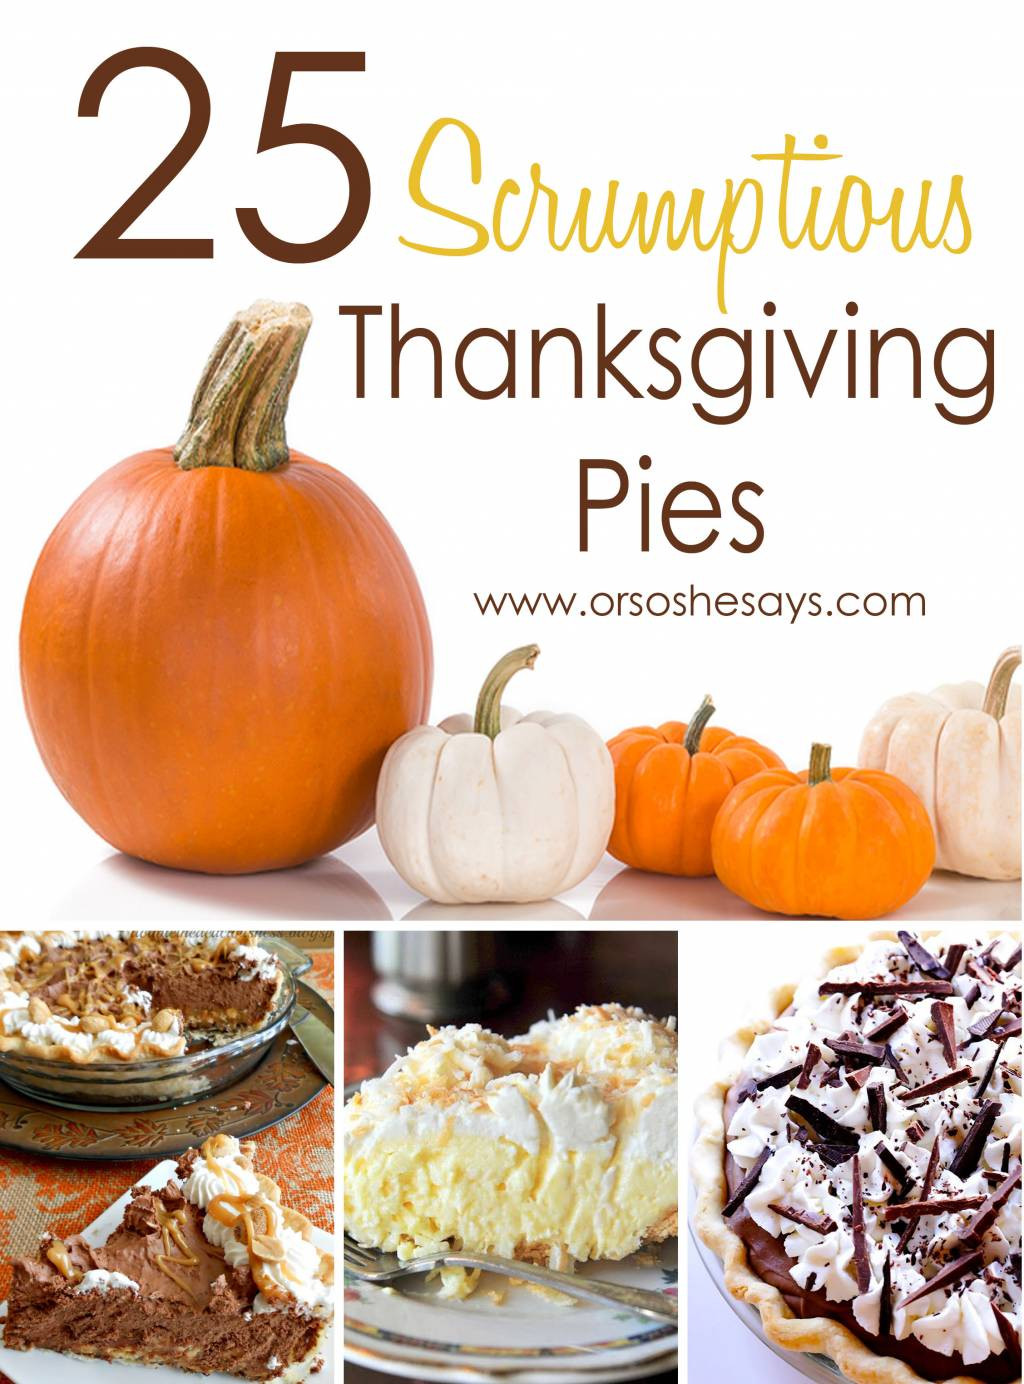 Best Pies For Thanksgiving
 25 Scrumptious Thanksgiving Pies she Mariah so she